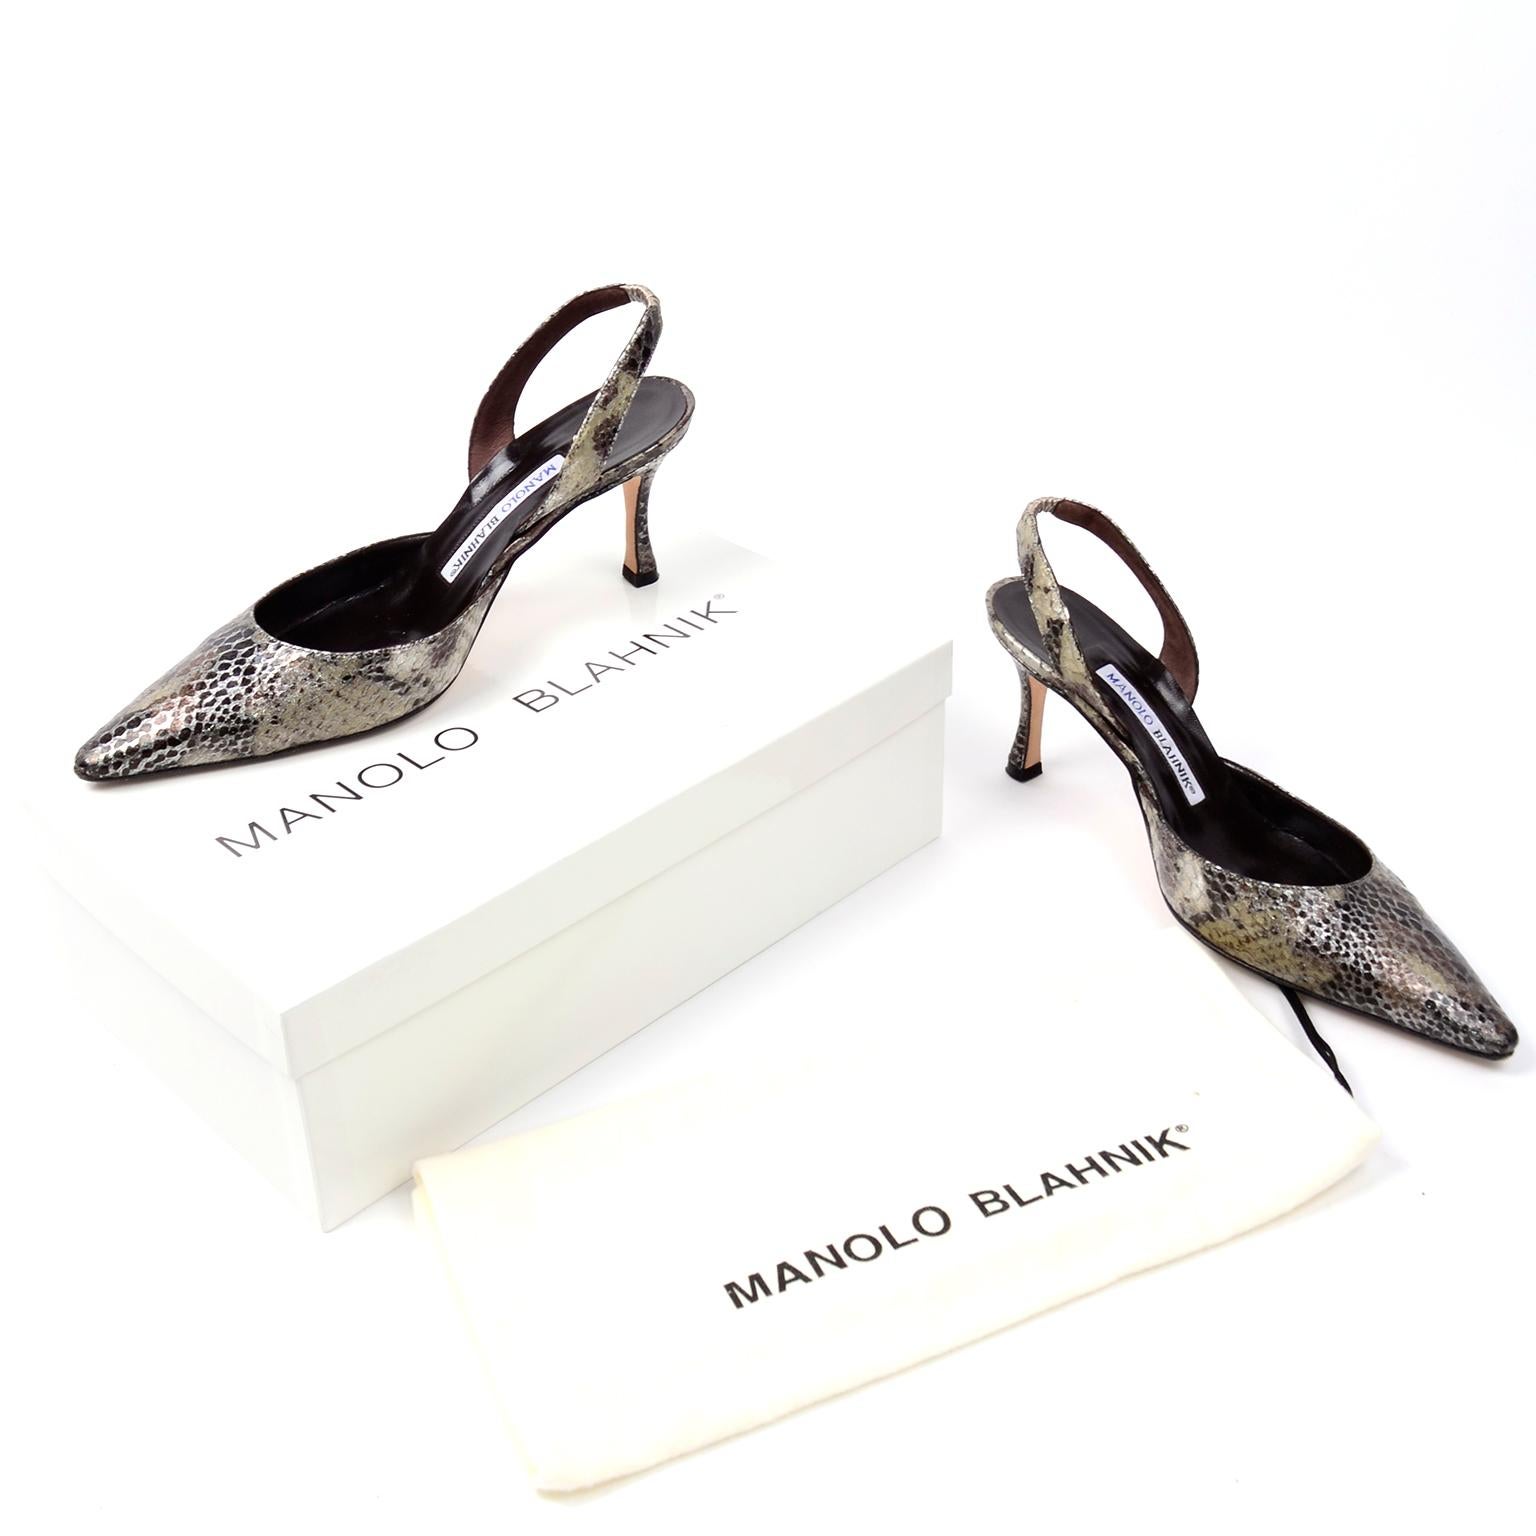 These timeless Manolo Blahnik pointed toe leather slingbacks are in a gorgeous metallic snakeskin pattern with hues of silver and green. The back of the slingback is elastic for easy entry. These beautiful shoes were hand made in Italy and the style